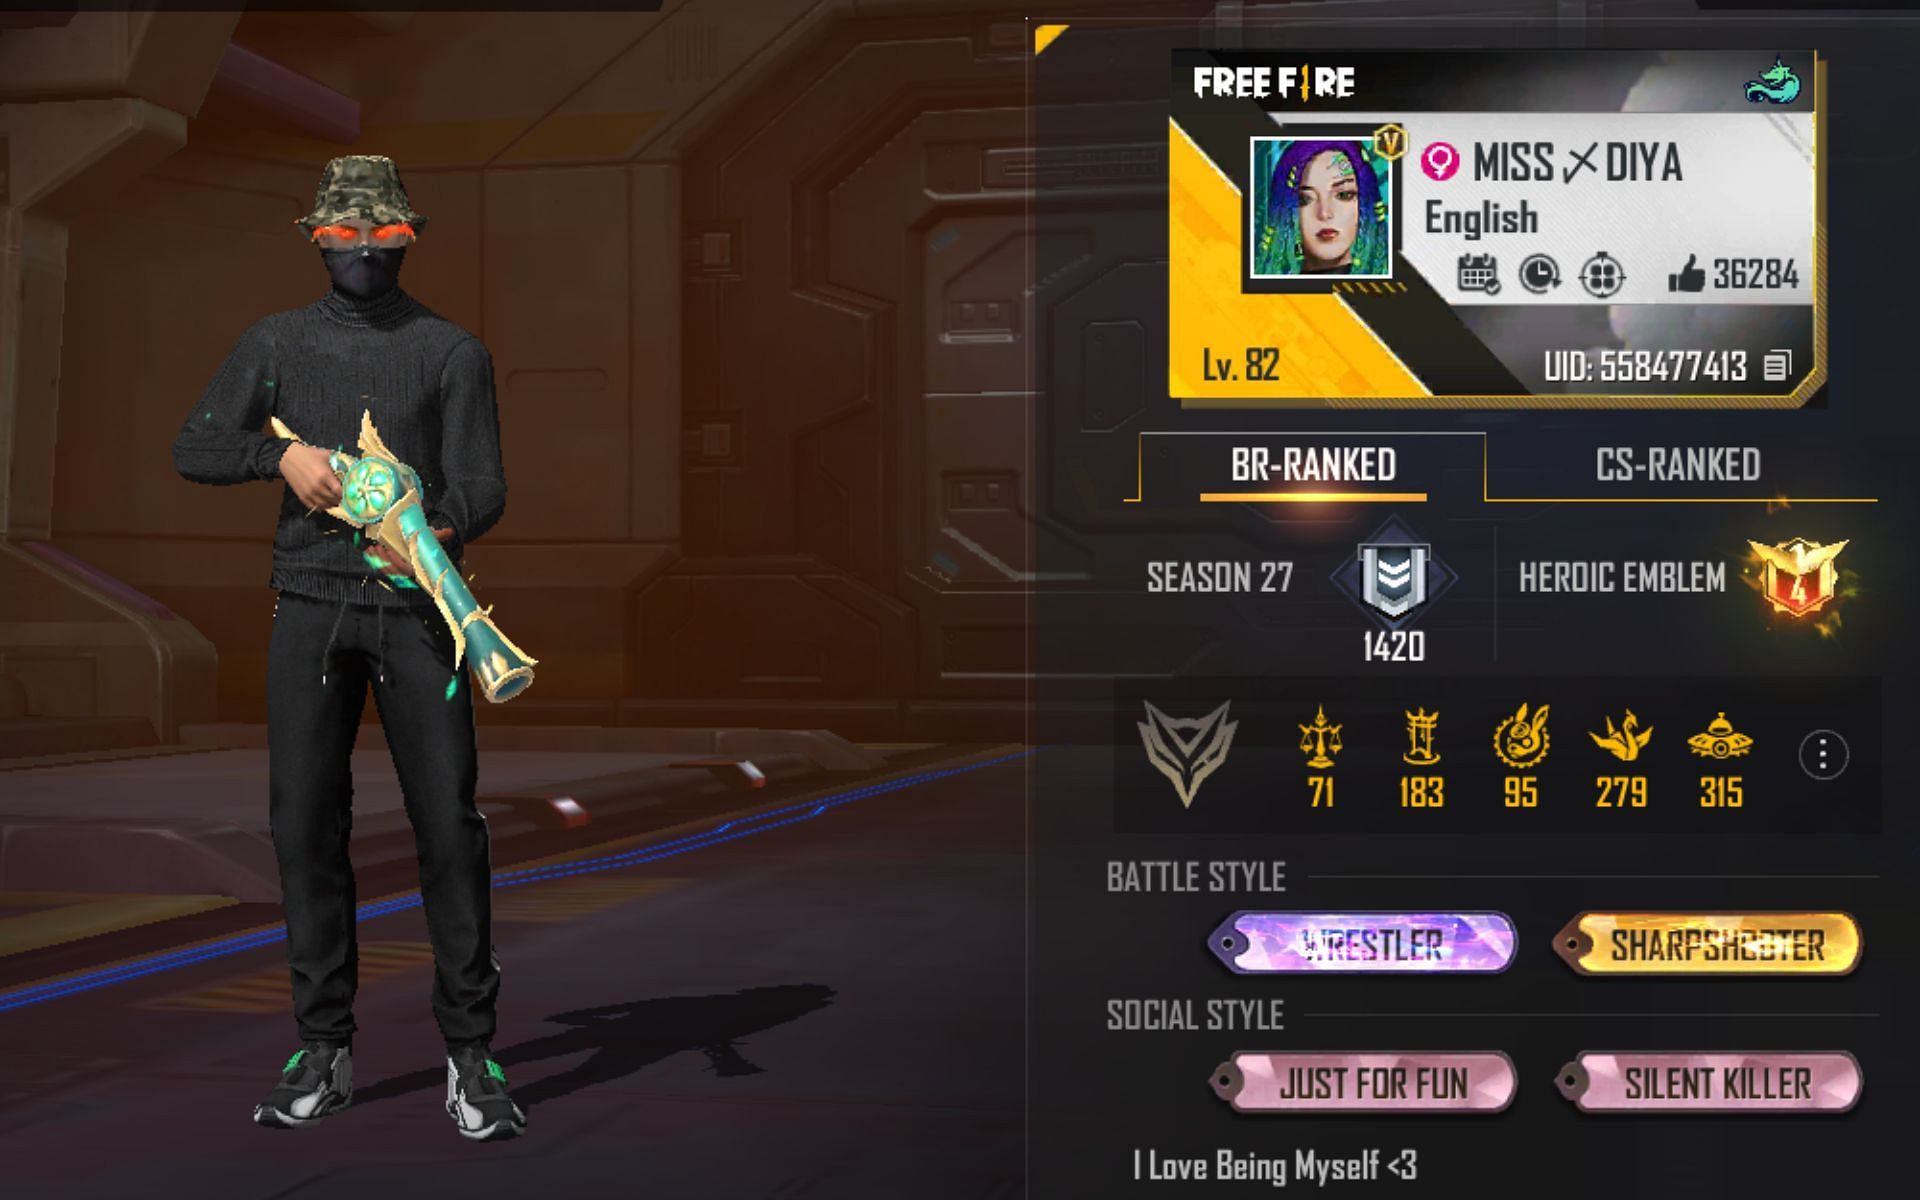 BlackPink Gaming's Free Fire ID, K/D ratio, stats, rank, real name 